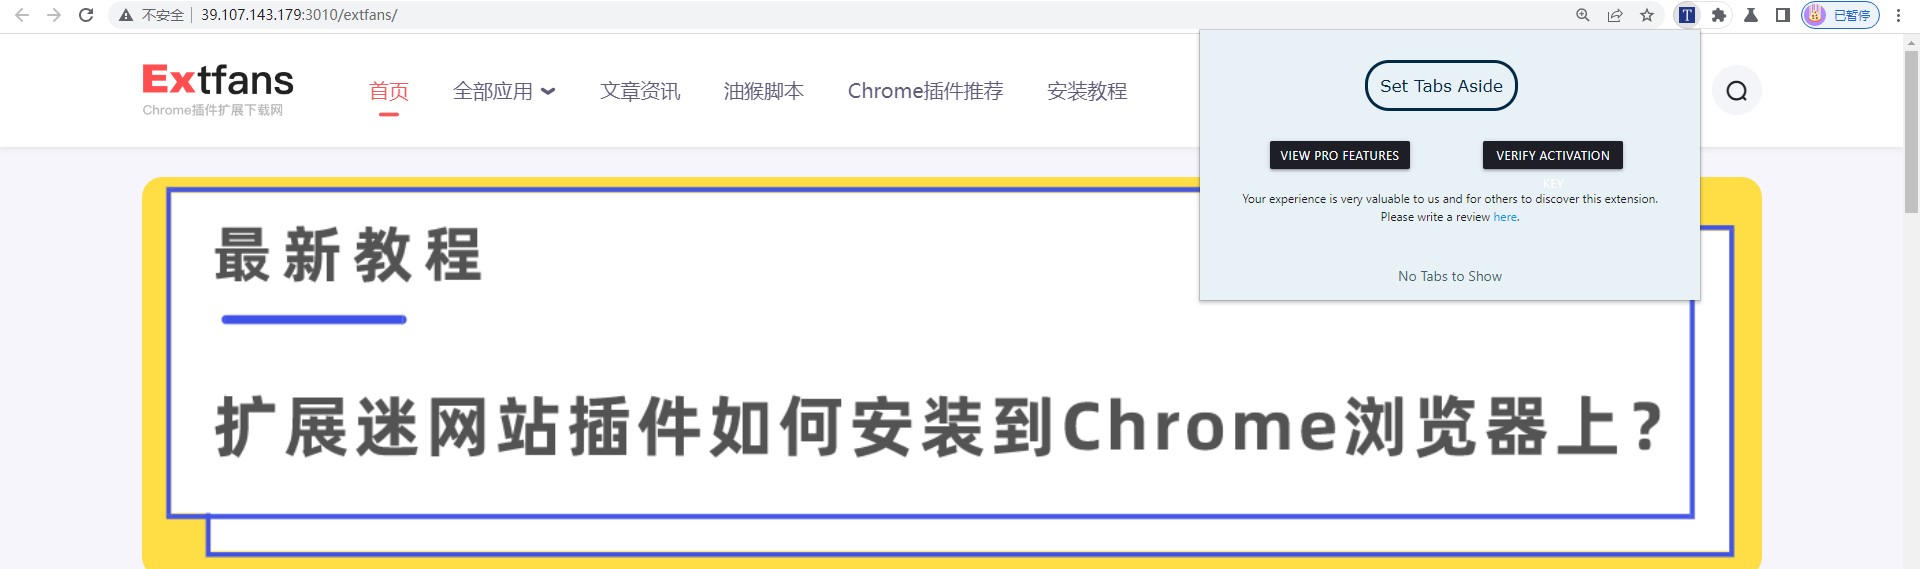 Save Chrome Tabs For Later 插件使用教程